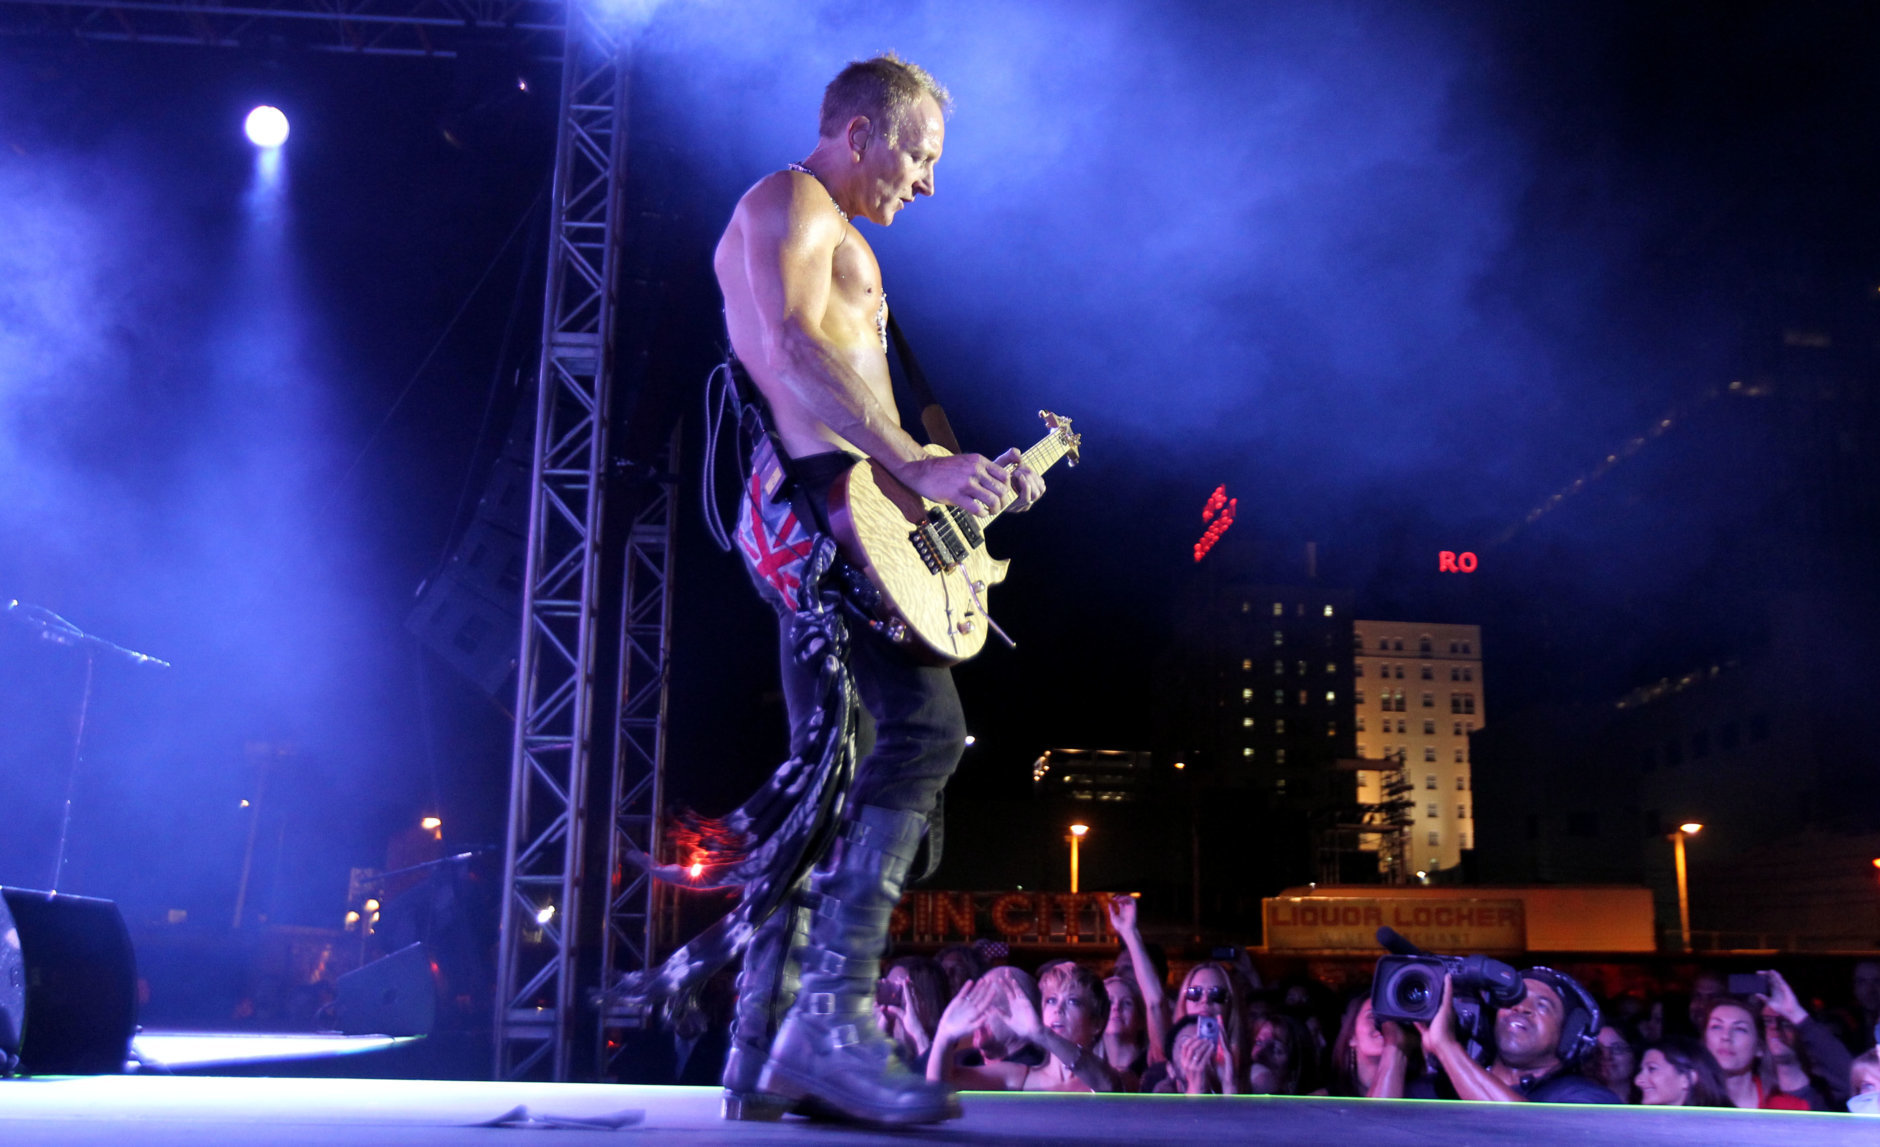 Phil Collen performs with the band Def Leppard at the after party for the "Rock of Ages" premiere on Friday June 8, 2012, in Los Angeles. (Photo by Matt Sayles/Invision/AP)